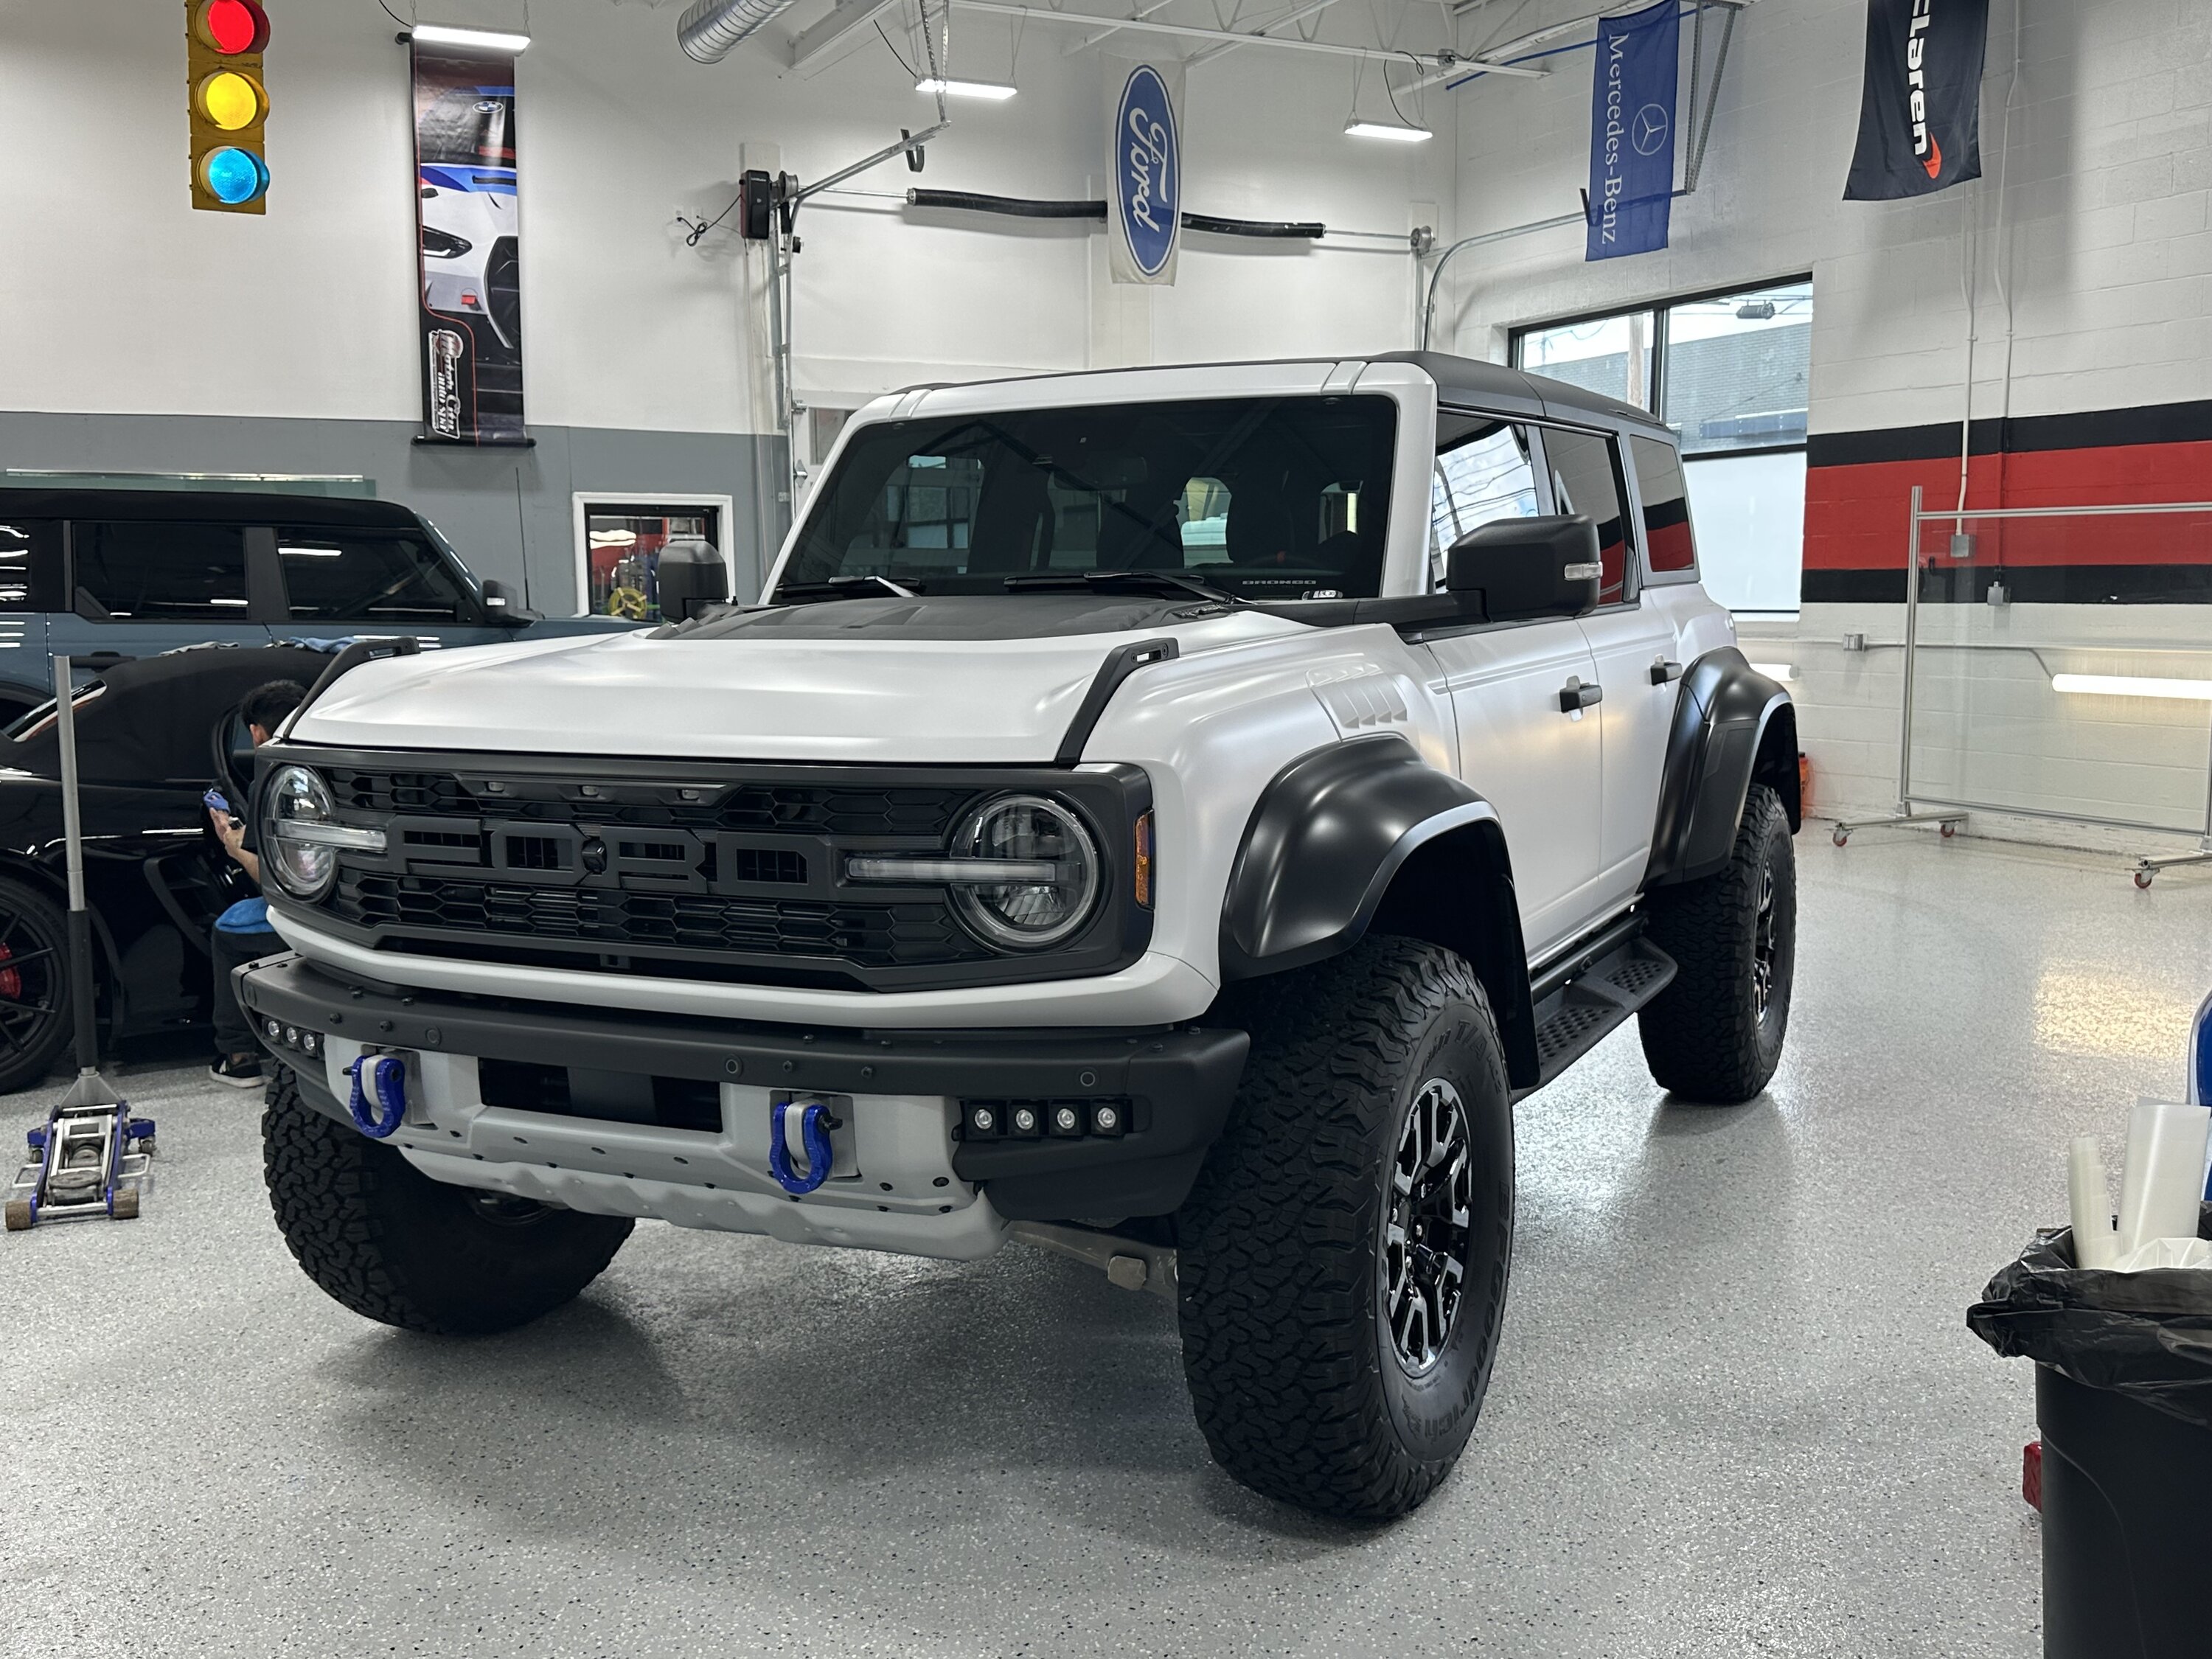 Ford Bronco XPEL Stealth PPF Wrap Completed on Bronco Raptor in Oxford White img_1171-jpe